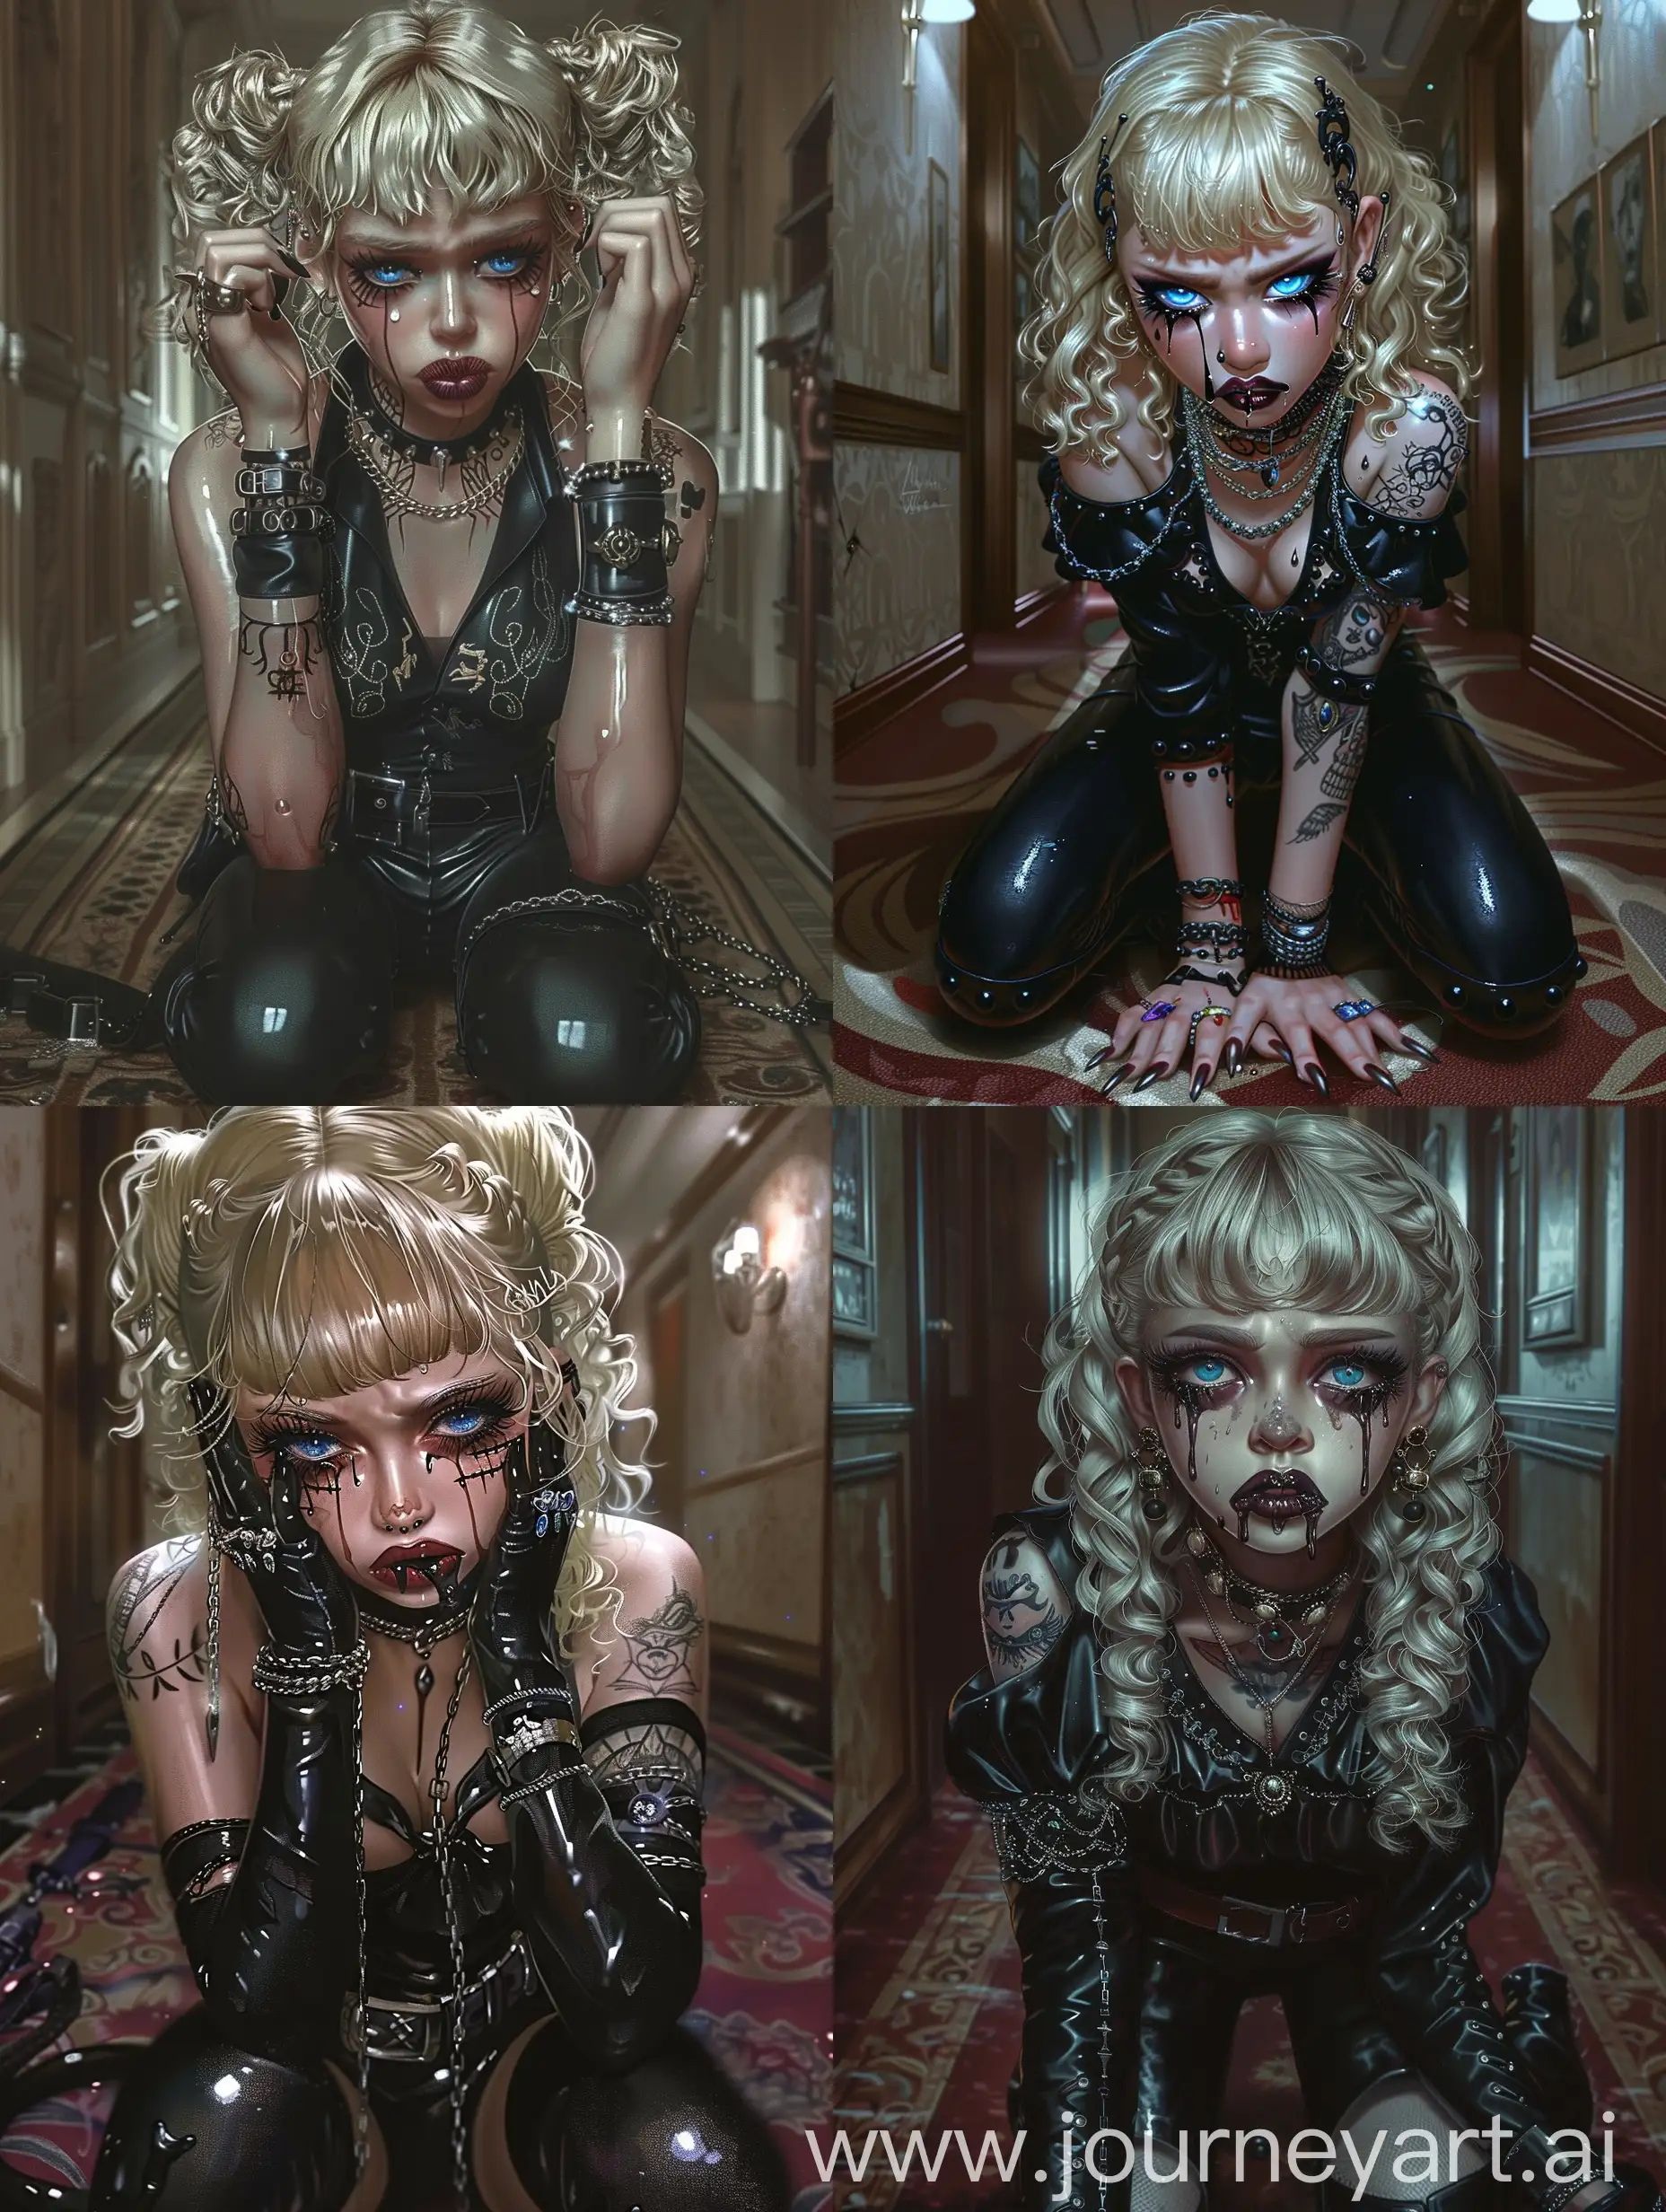 korean art style, 2D, semi realistic, goth girl, blue eyes, glossy skin, plum glossy lips, nicely done black eyeliner, well made black heavy make up, full long black lashes, 20 years old, blonde hair, curls, one side of hair behind ear, bangs, goth style, goth girl, shedding tears, sad expression, goth latex choker, different silver necklaces, well made japanese tattoos on neck and arms, well made goth blouse with designs and style, black latex pants, goth belt, different leather bracelets and silver bracelets, black glossy nail polish, kneeled down, in well made hotel corridor, haunted, abandoned, grotesque, spooky vibe